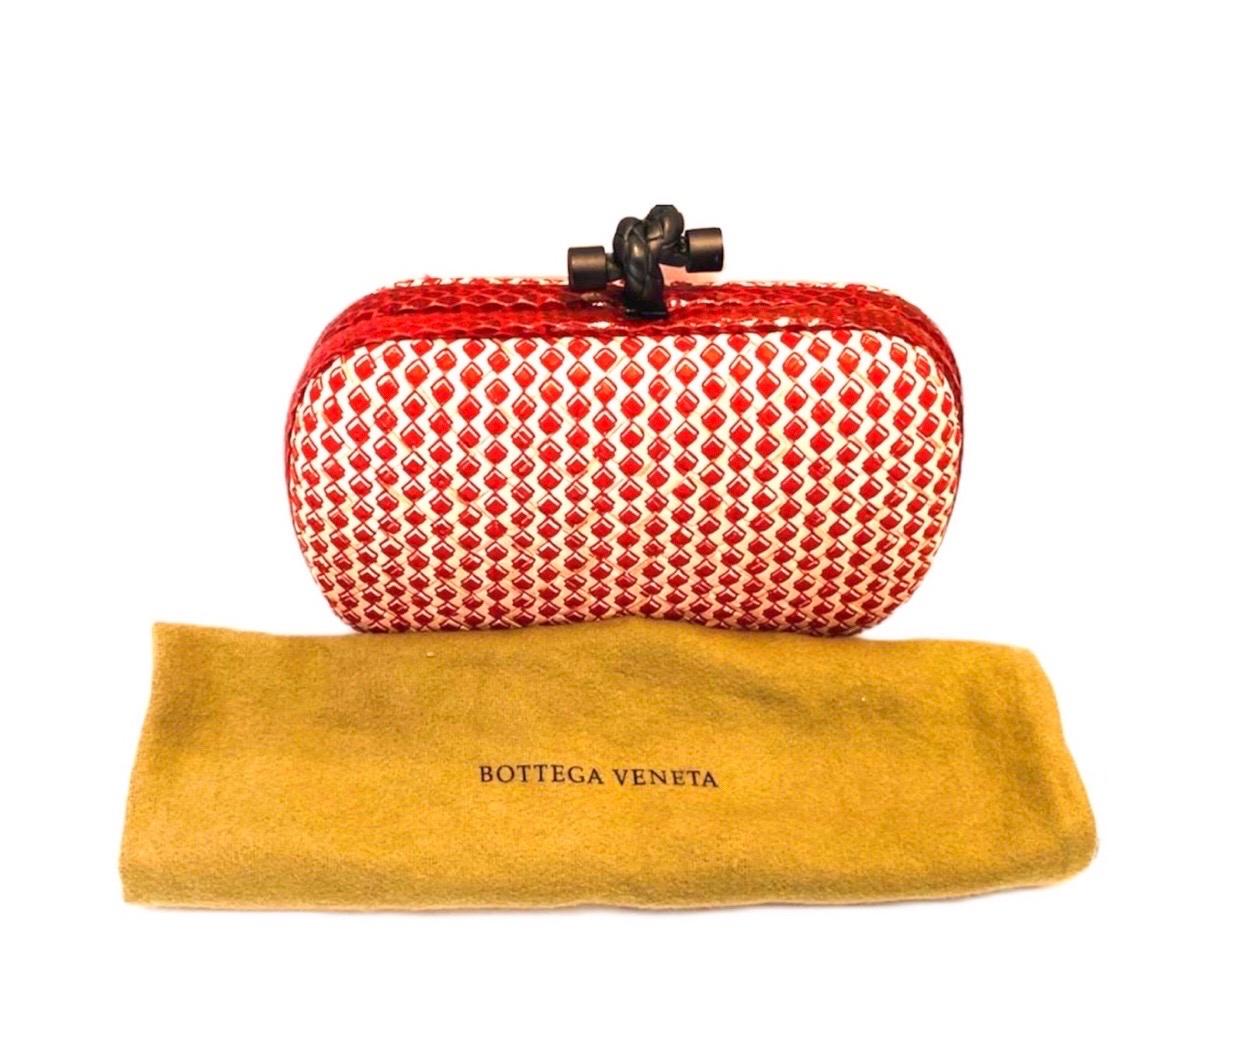 Clutch Knot BOTTEGA VENETA python inserts , 2018 In Excellent Condition For Sale In Milan, IT